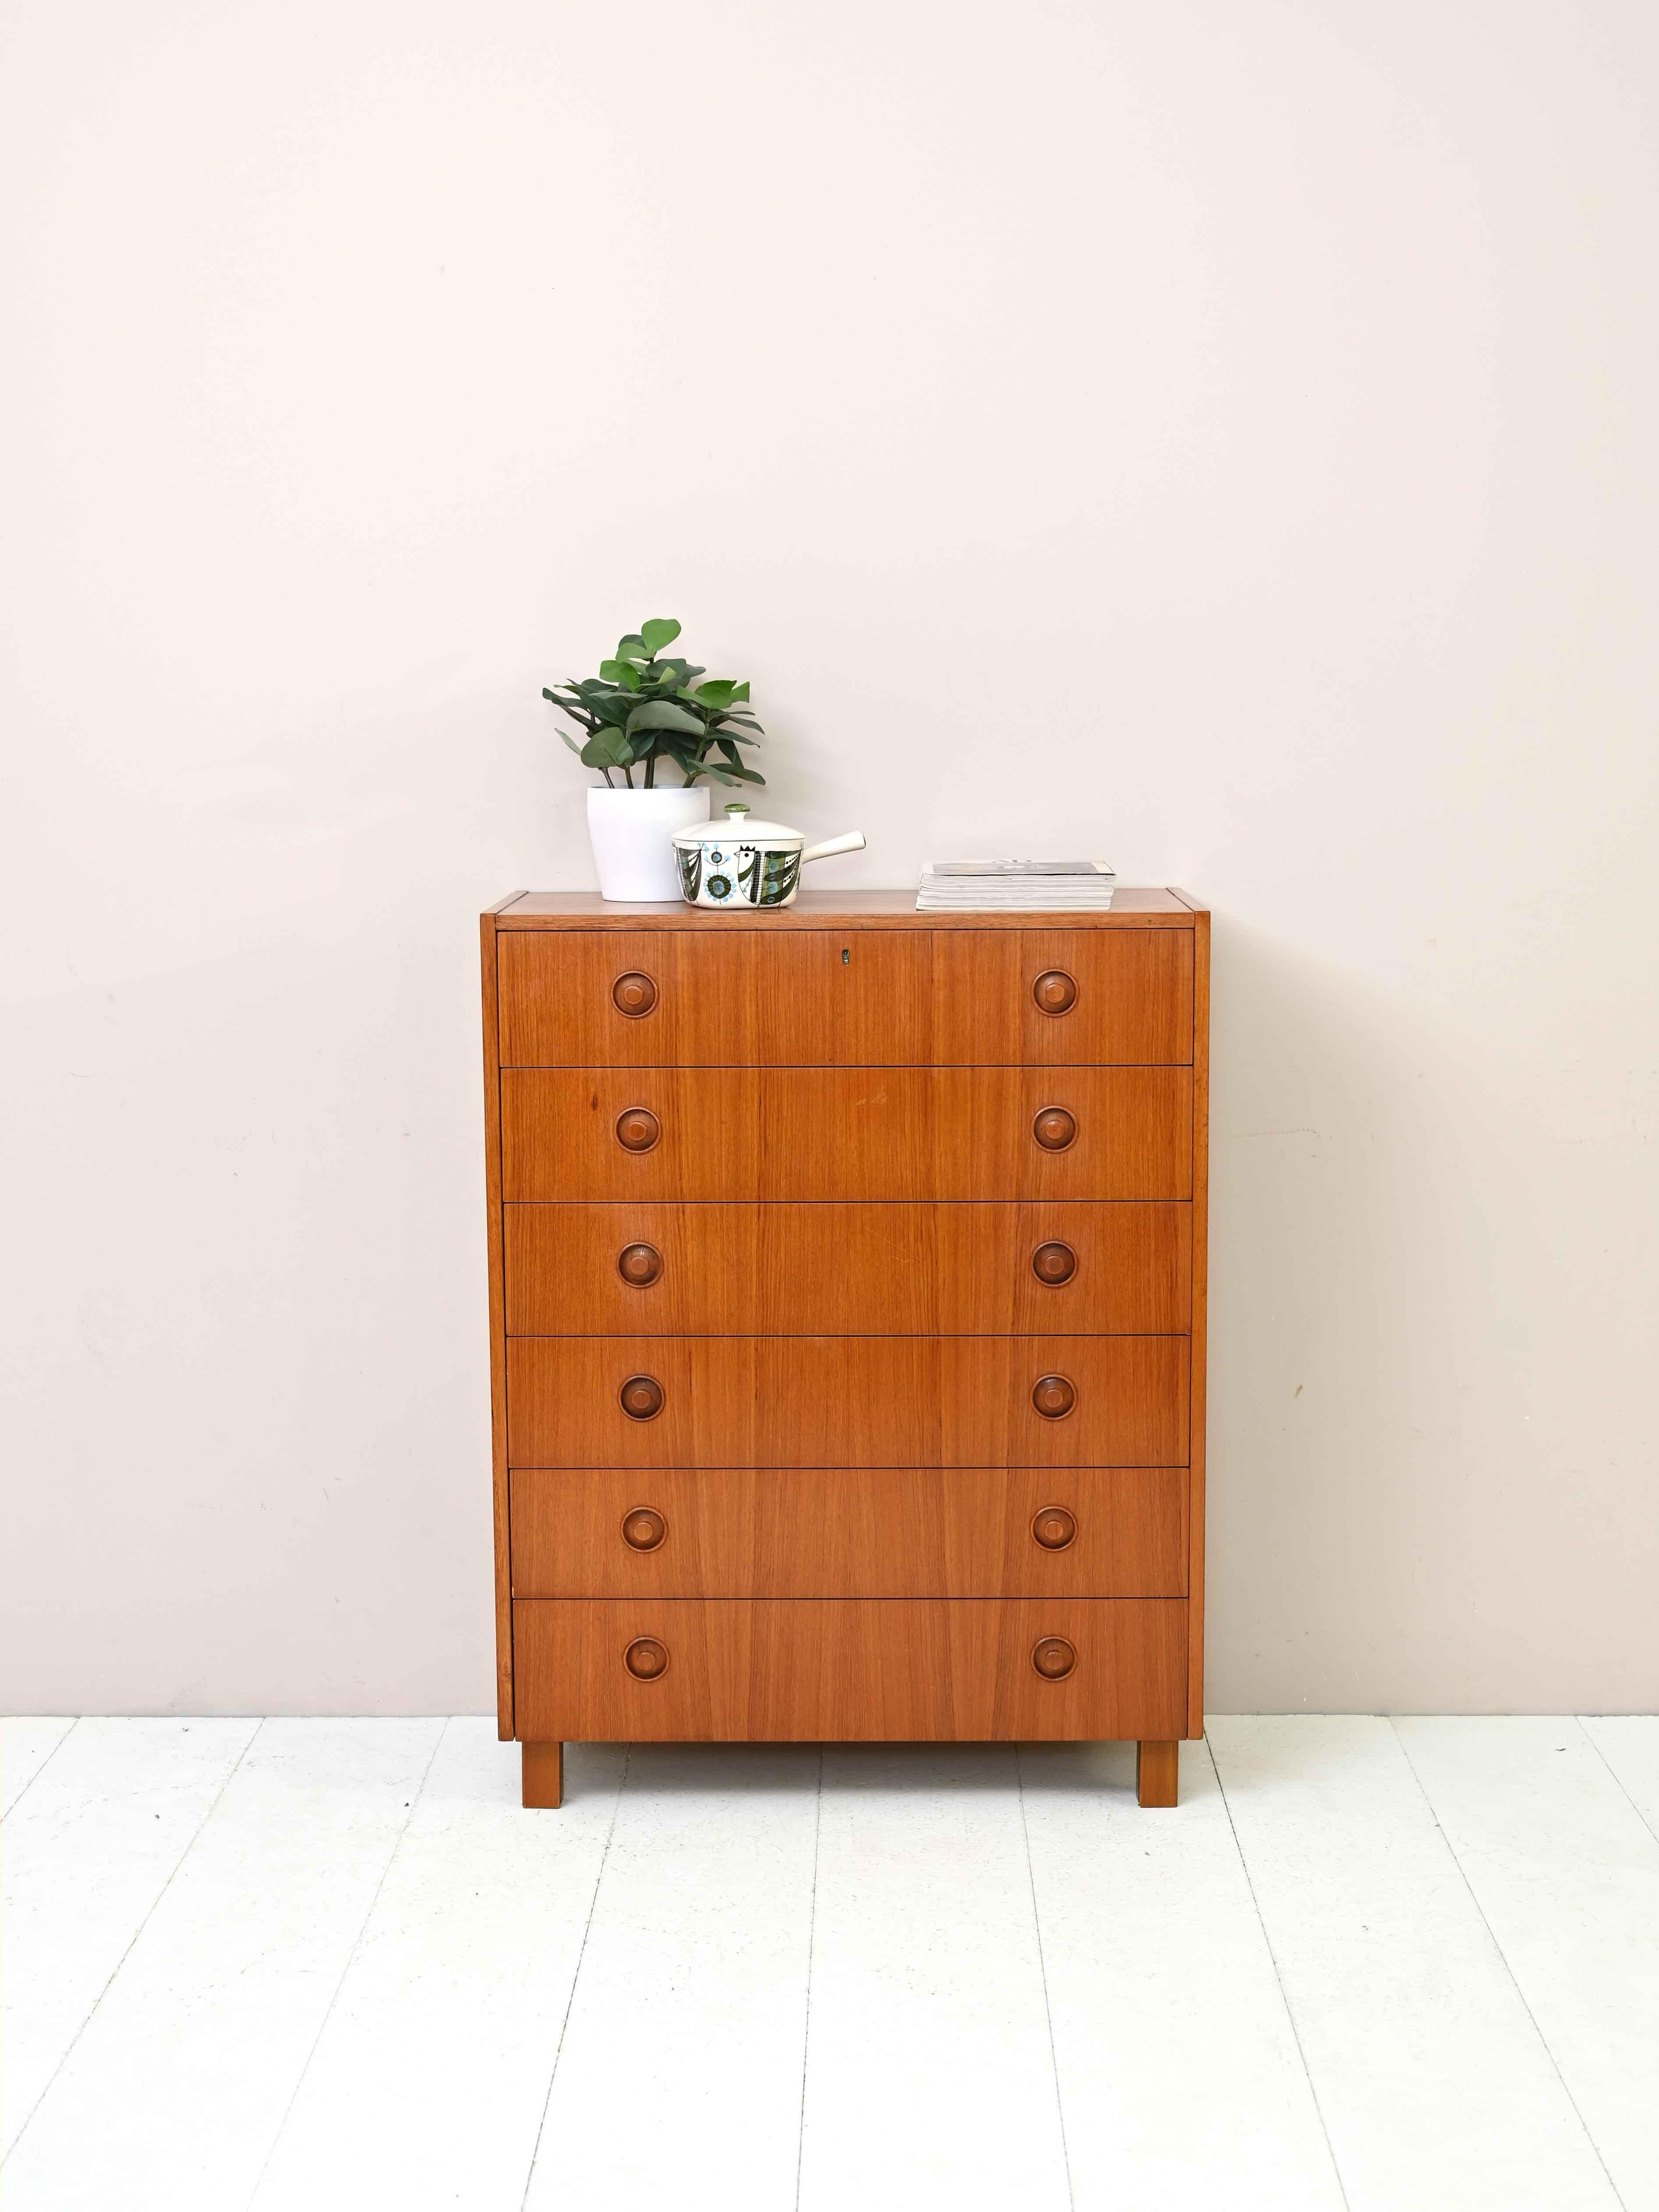 Scandinavian cabinet with 6 drawers original from the 1950s.
A capacious chest of drawers that traces mid-century taste and style. The structure is simple and linear and the legs are square. Round drawer knobs characterize this piece of furniture